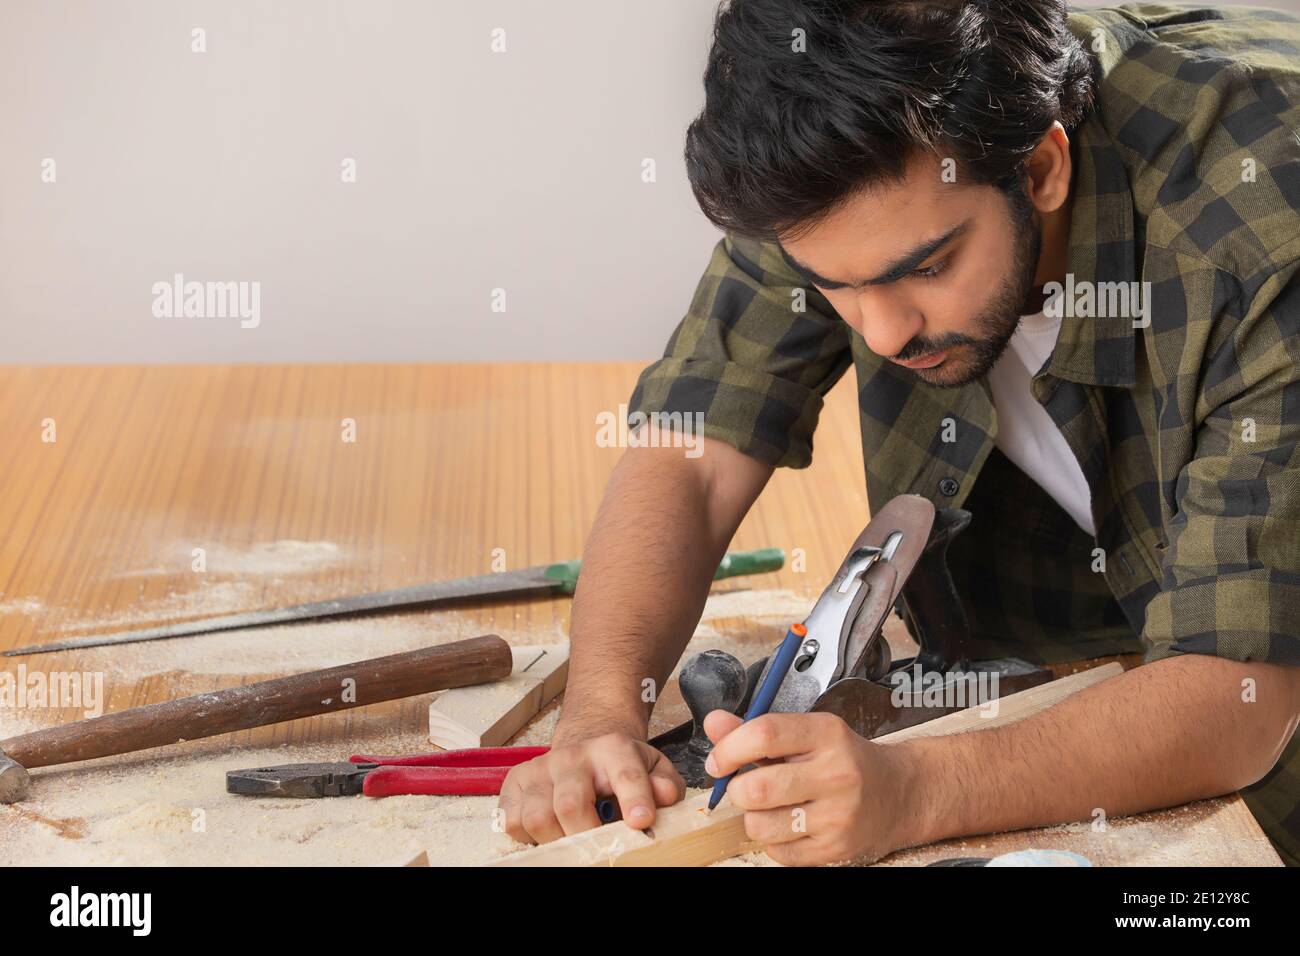 A YOUNG CARPENTER MEASURING WOOD WHILE WORKING Stock Photo